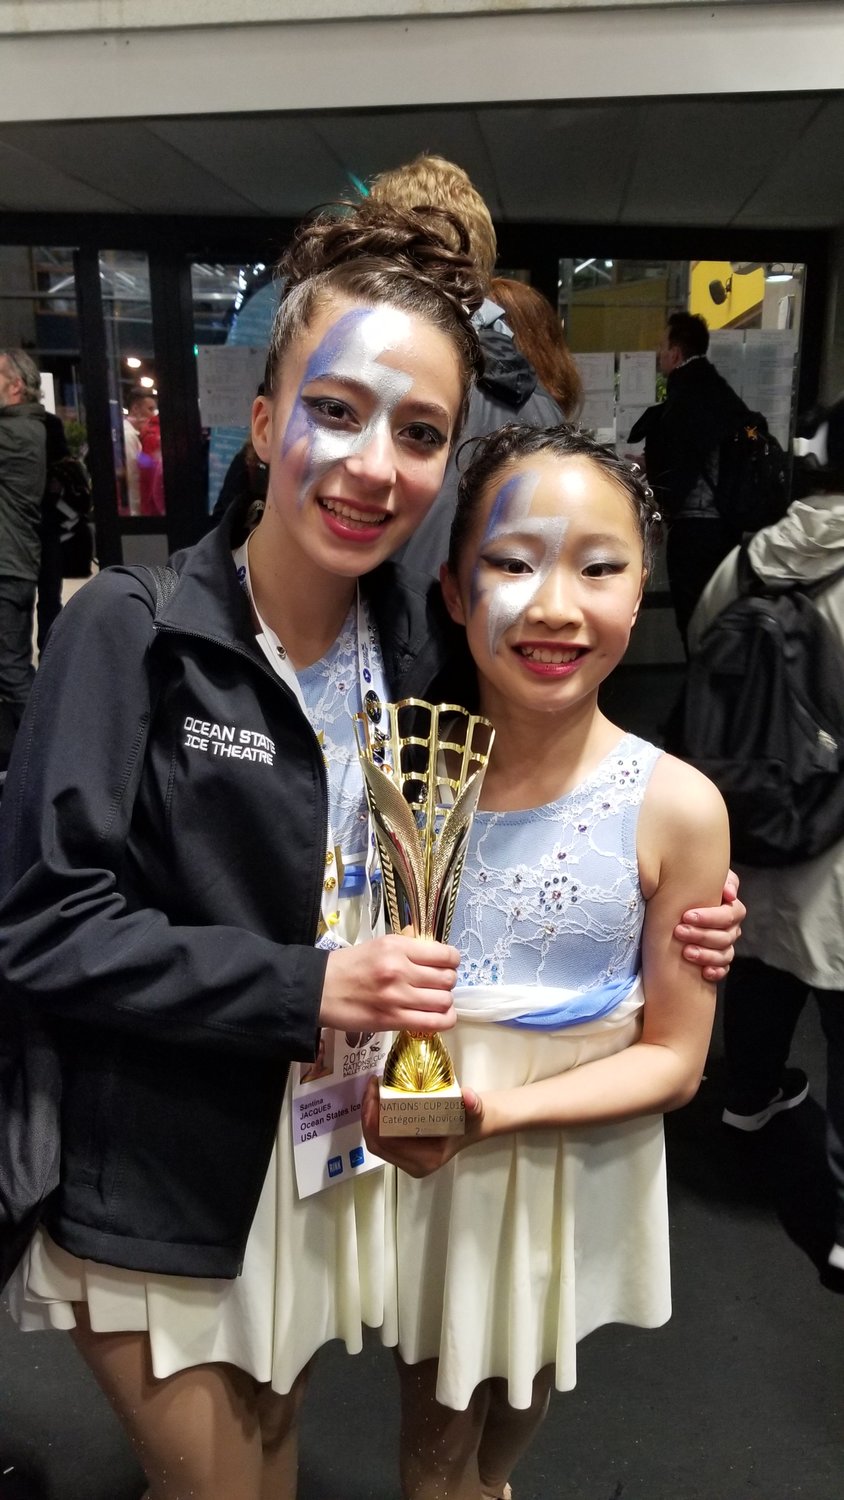 Barrington residents Santina Jacques (left) and Iris Yang pose for a photograph with the second place trophy at Nation's Cup International Figure Skating Competition, held in France.